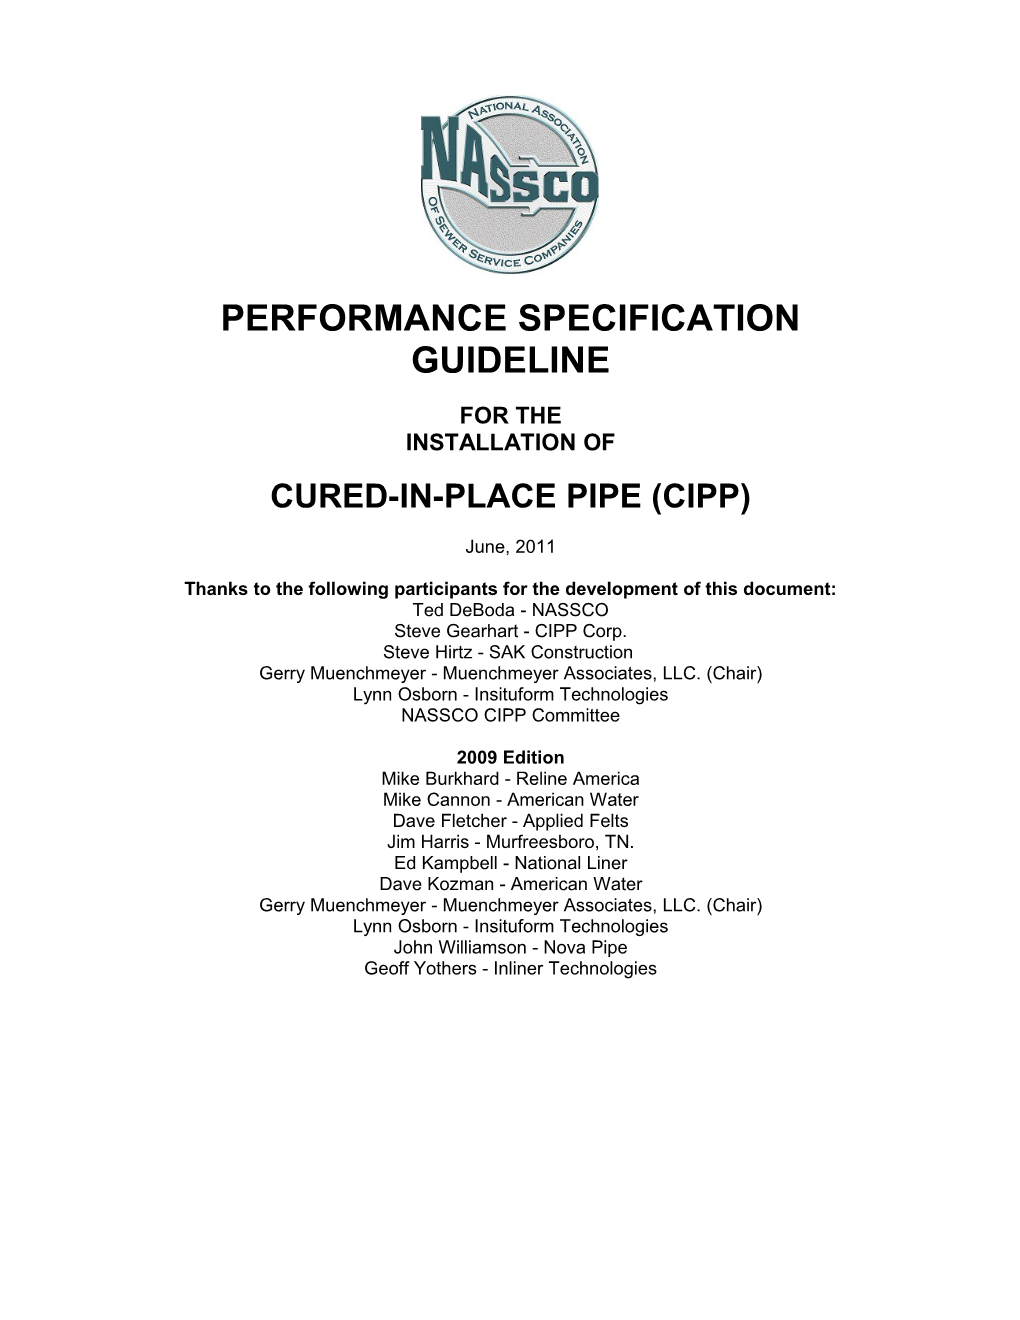 Cured-In-Place Pipe (Cipp)